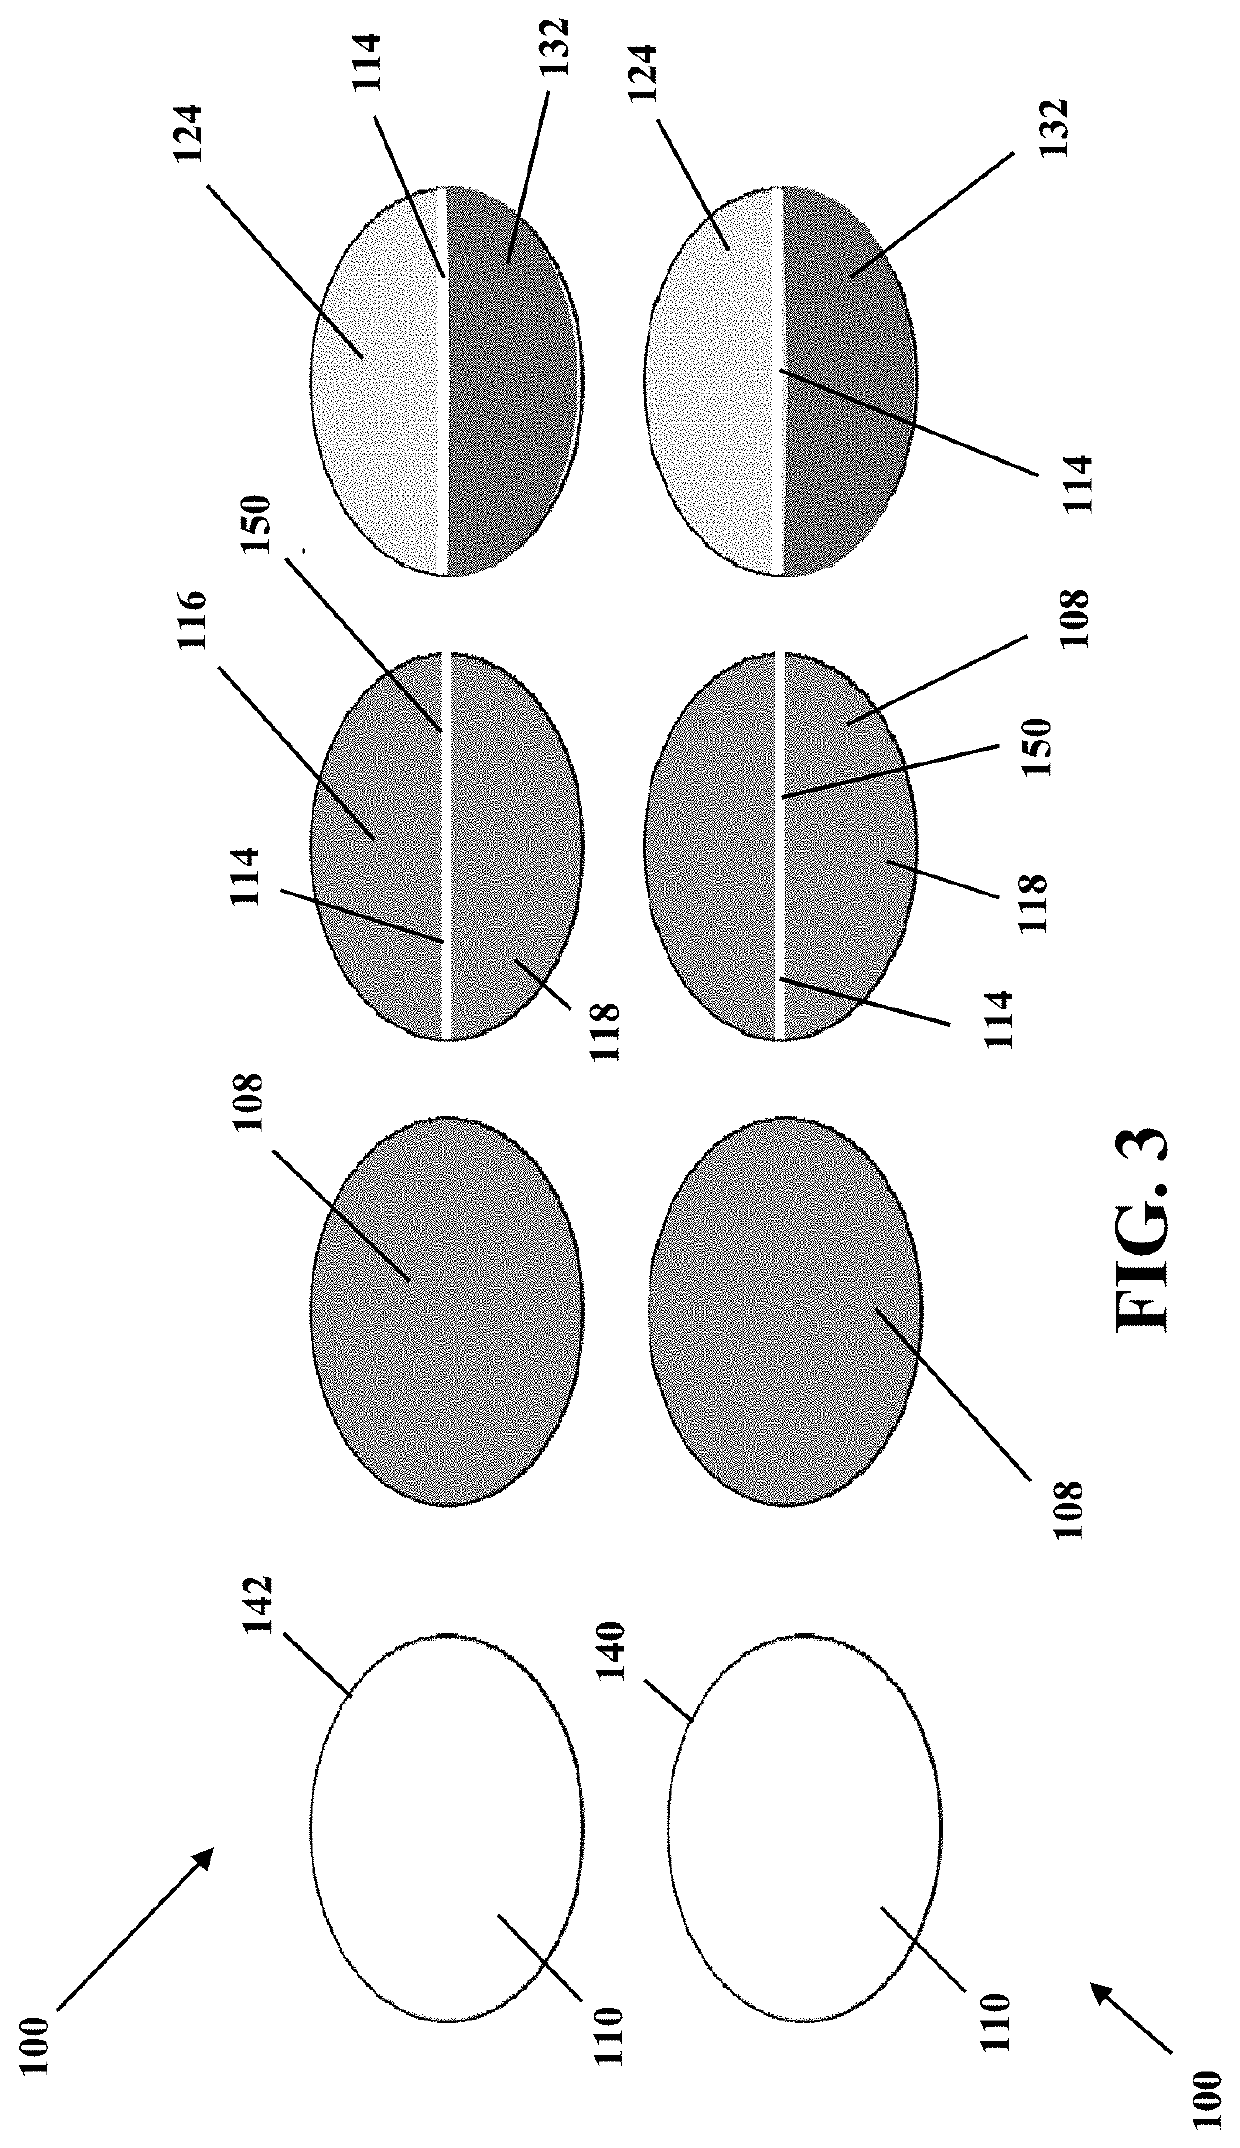 Method for creating multiple electrical current pathways on a work piece using laser ablation